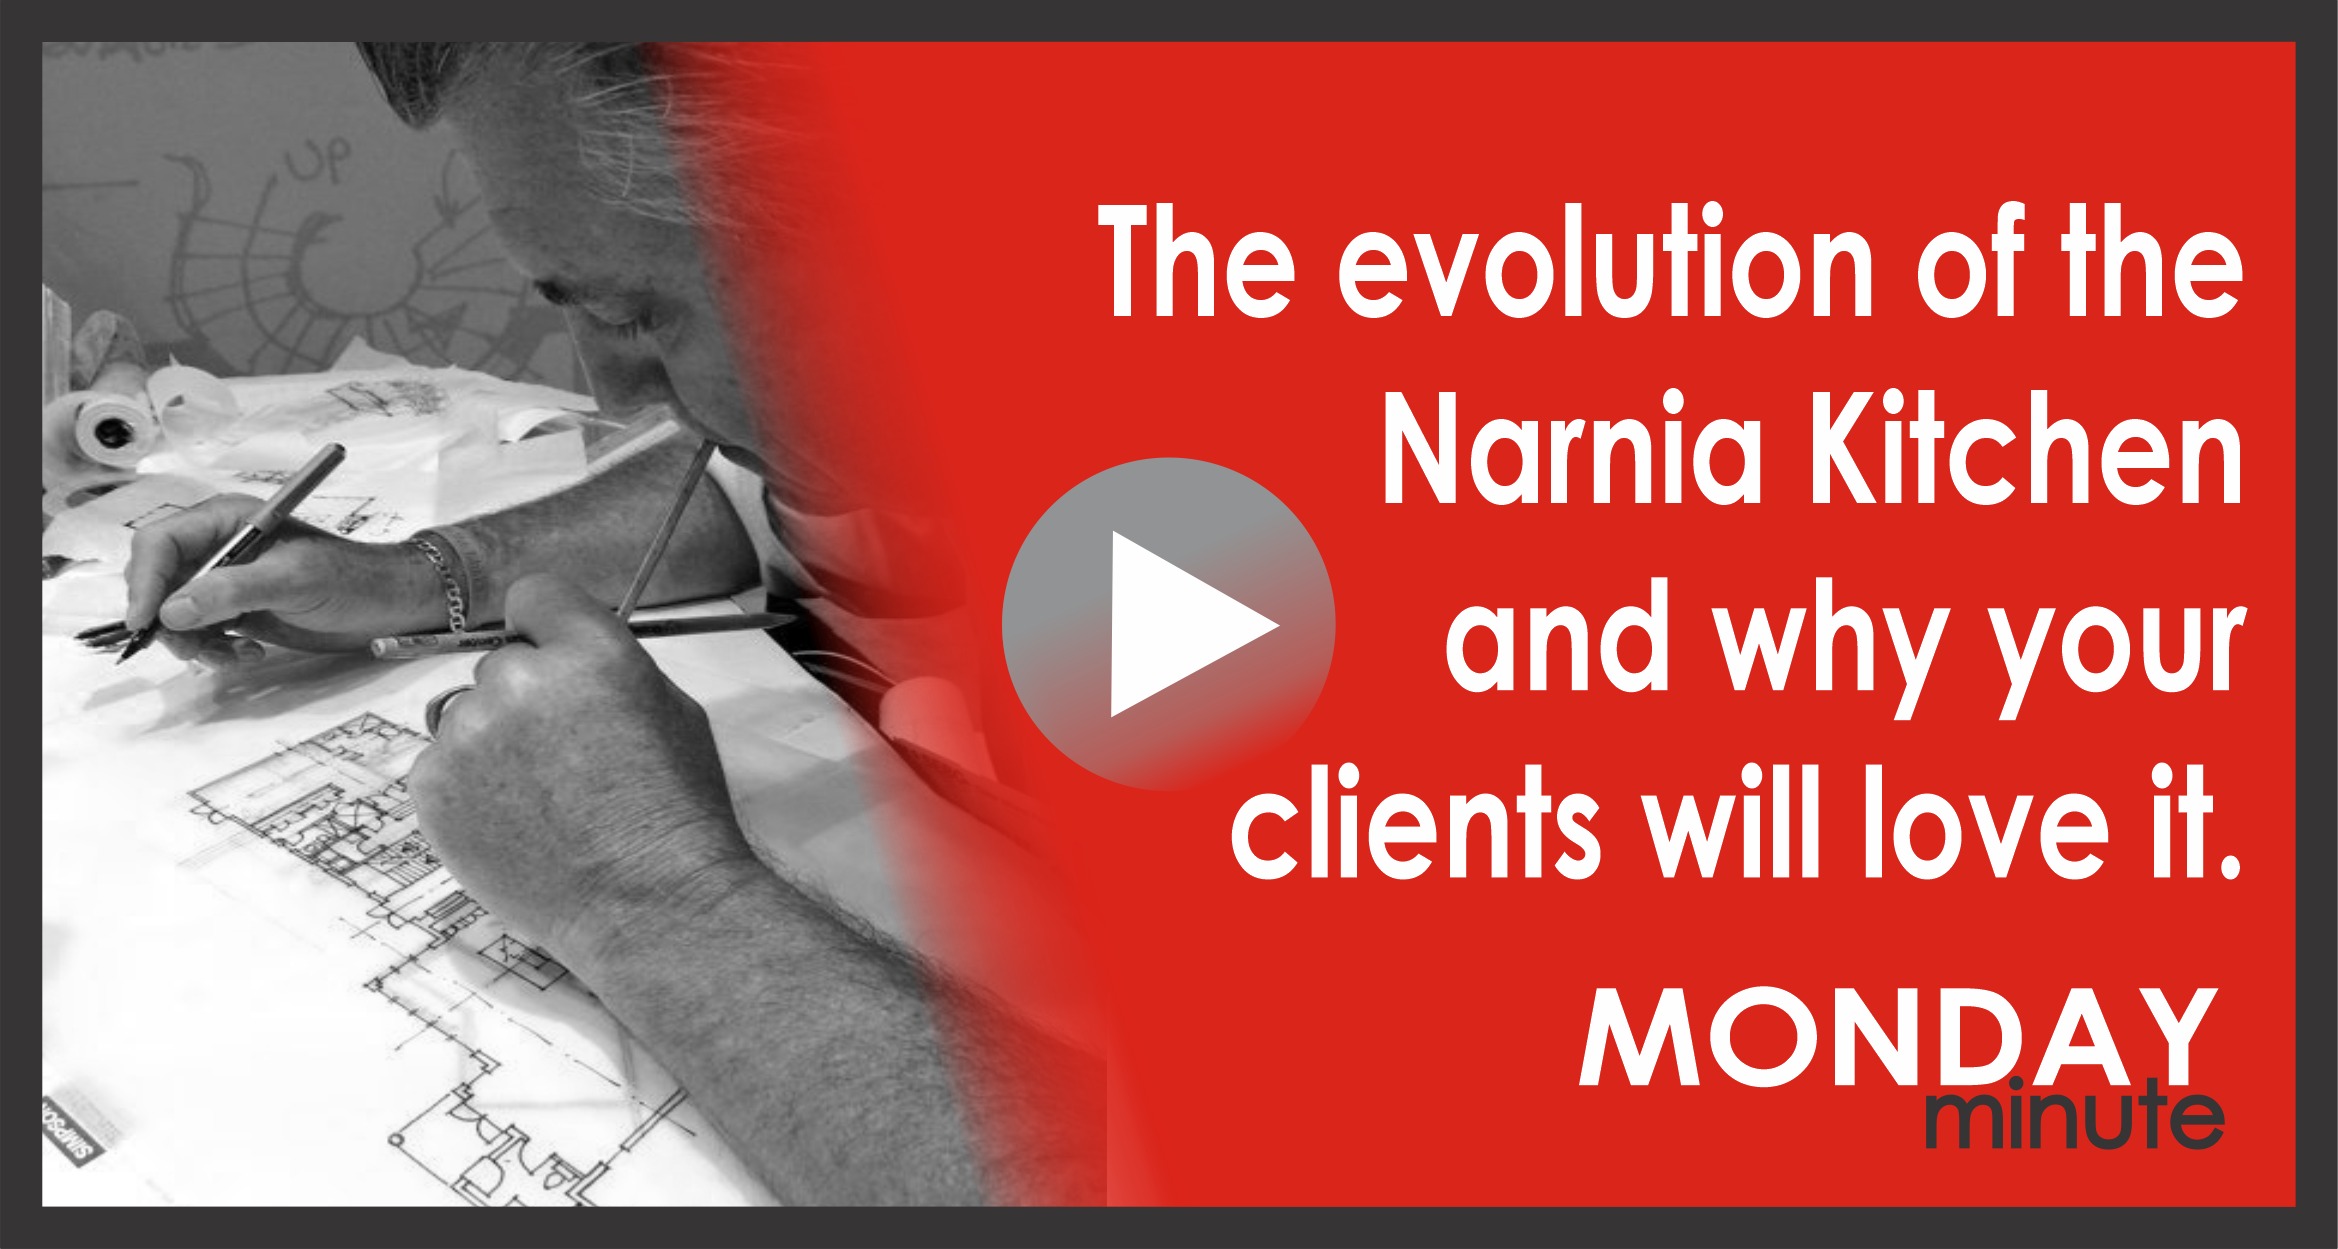 The evolution of the Narnia Kitchen and why your clients will love it. [Monday Minute]